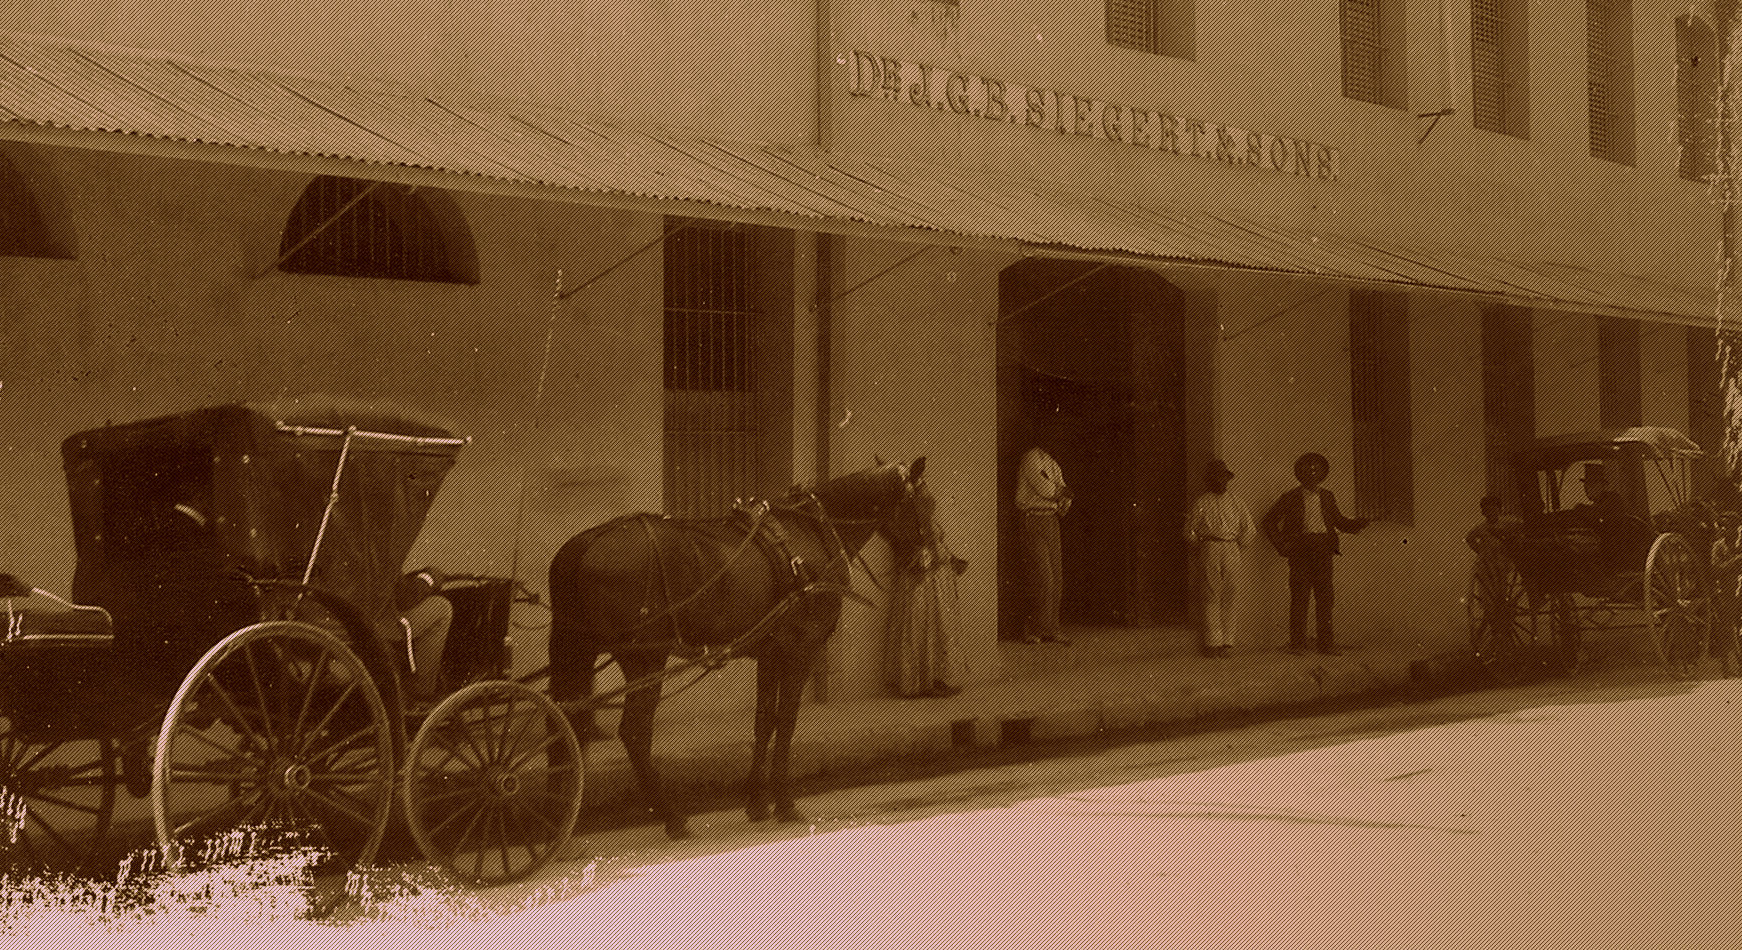 Siegert and Sons Anostura Original Location in Port of Spain